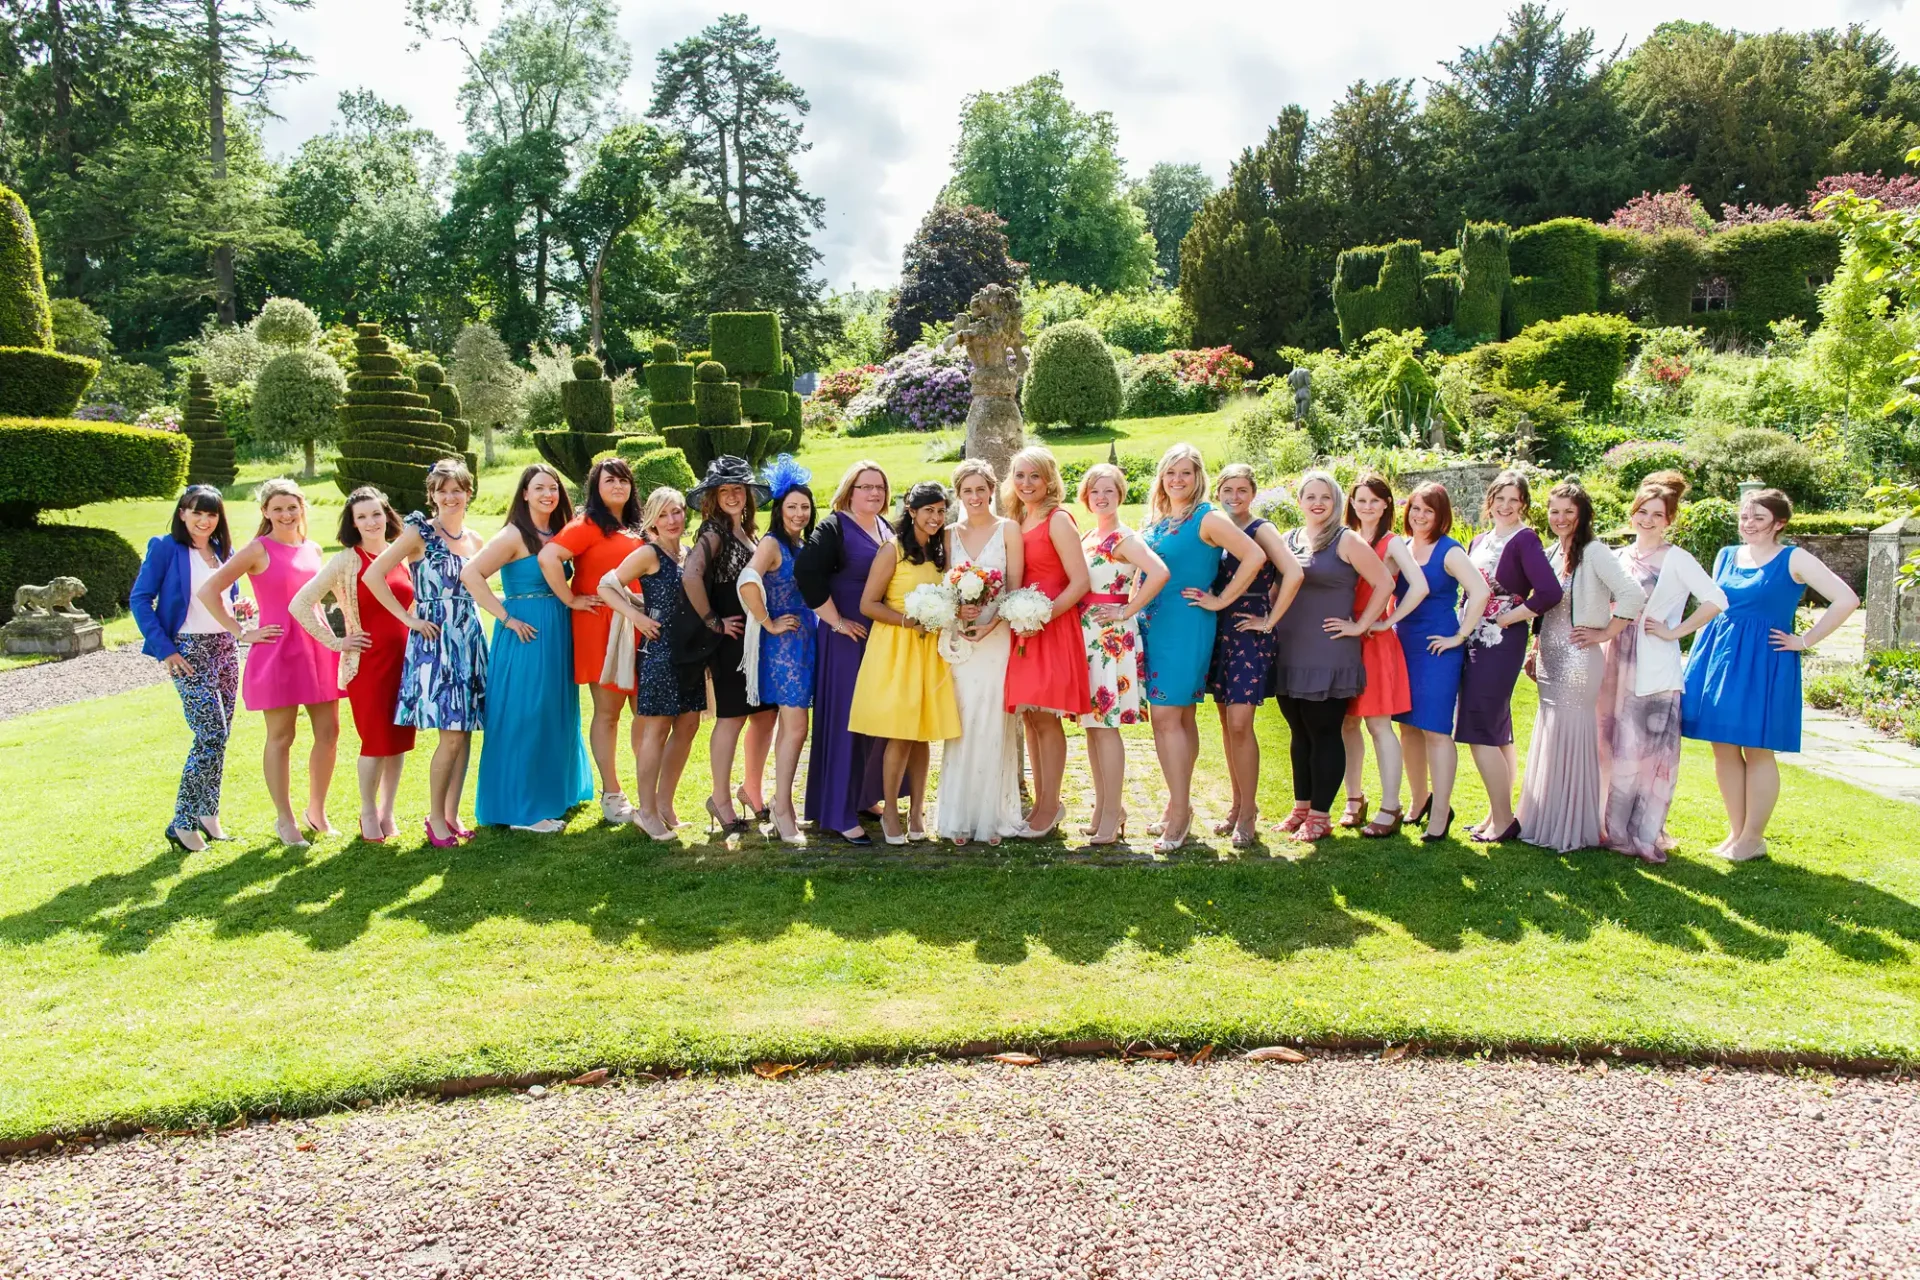 Group of women in colorful dresses posing for a photo at a garden party on a sunny day.